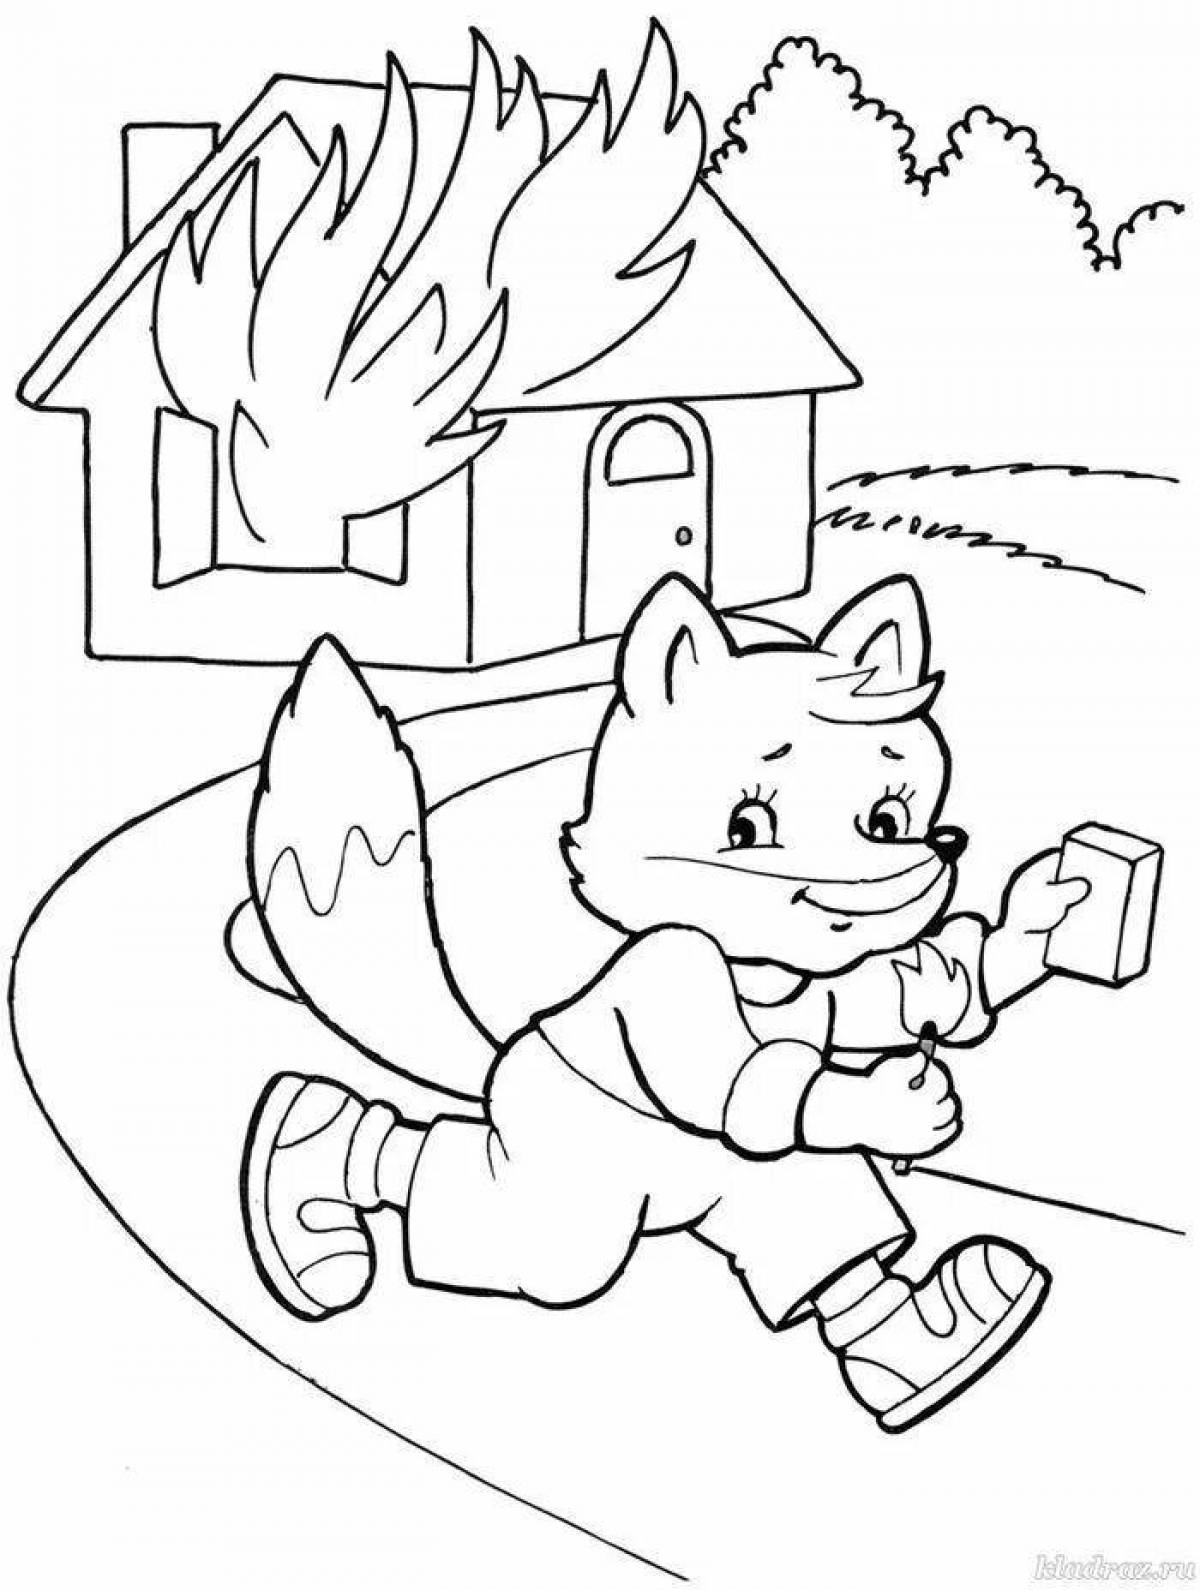 Color-luscious child safety coloring page